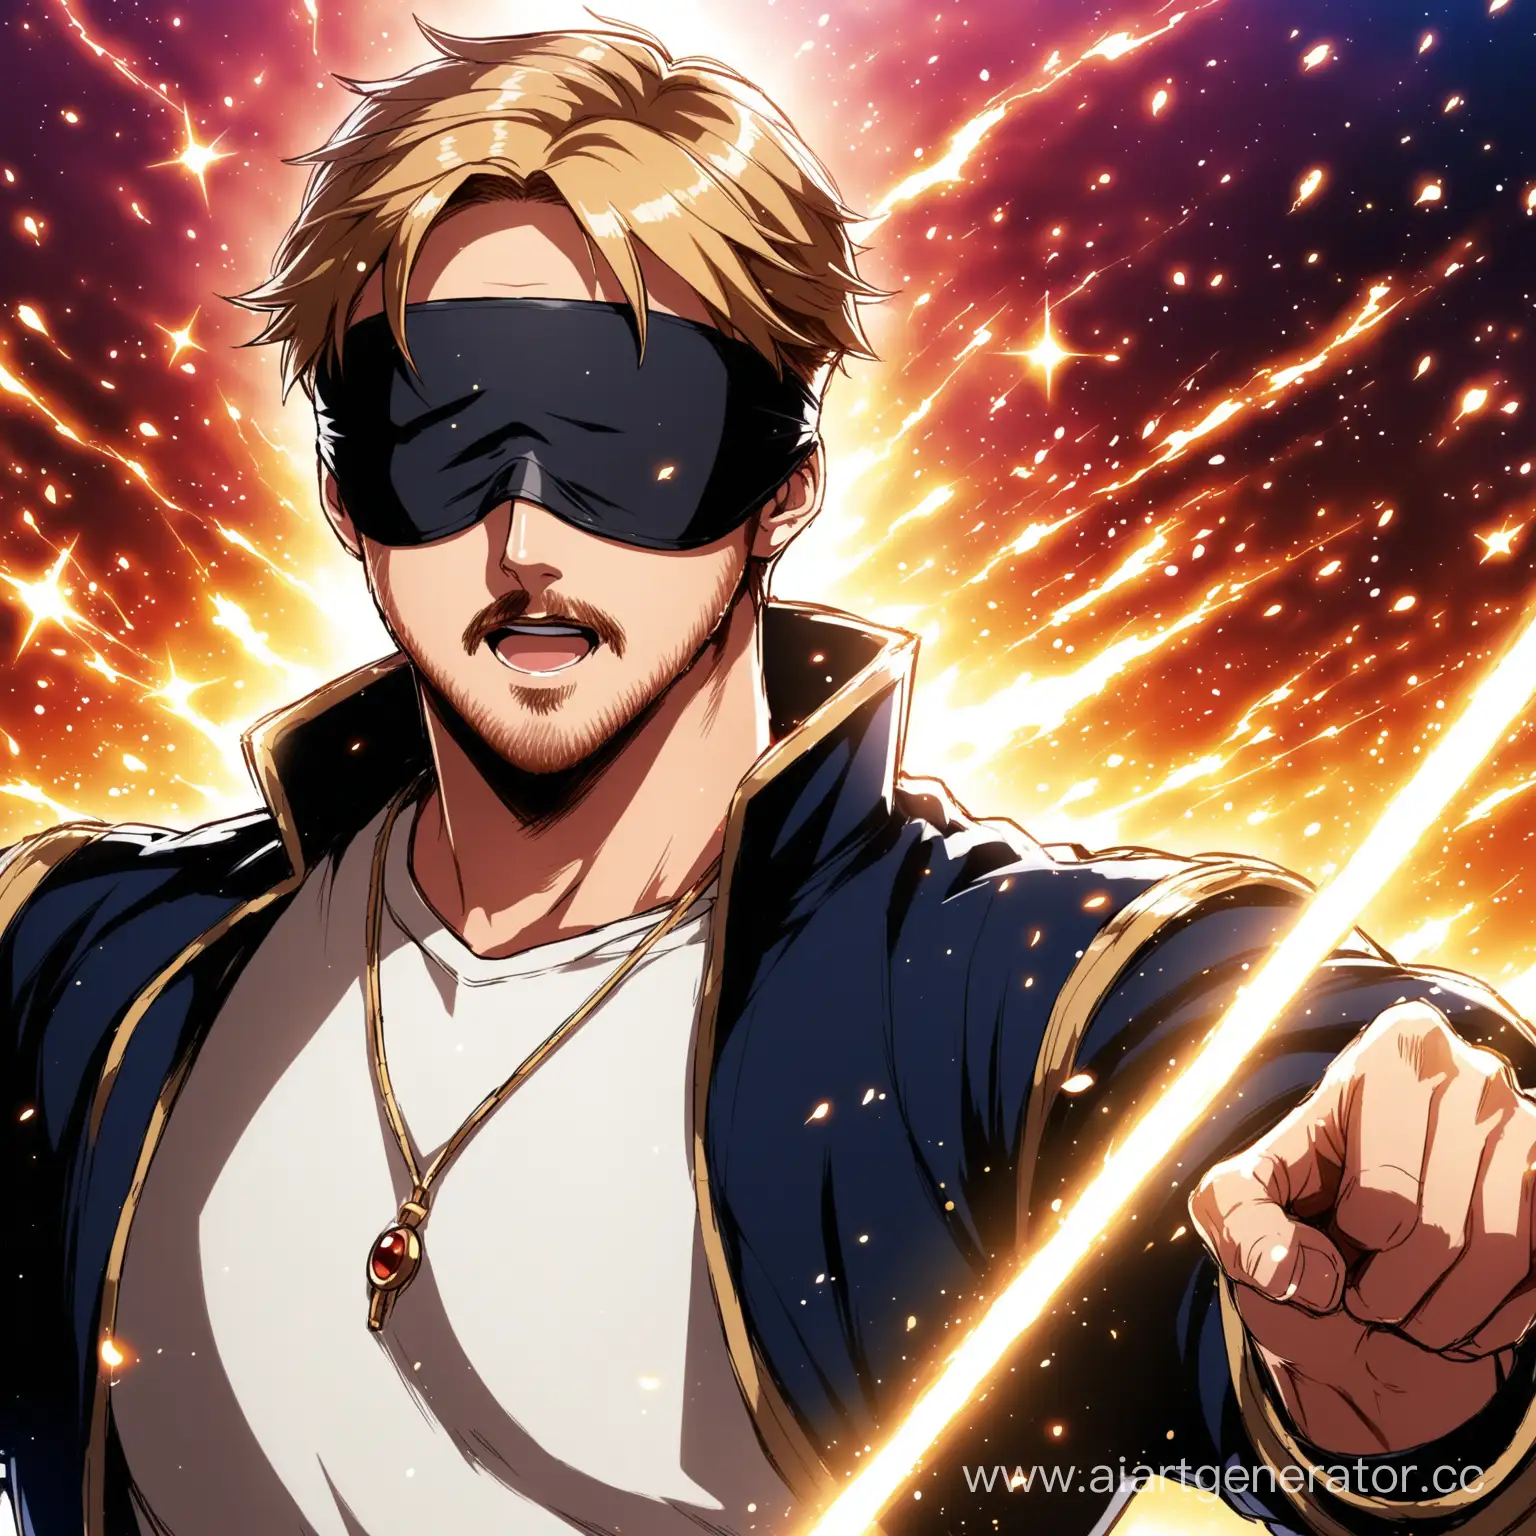 Ryan-Gosling-Anime-Magical-Battle-with-Blindfolded-Intensity